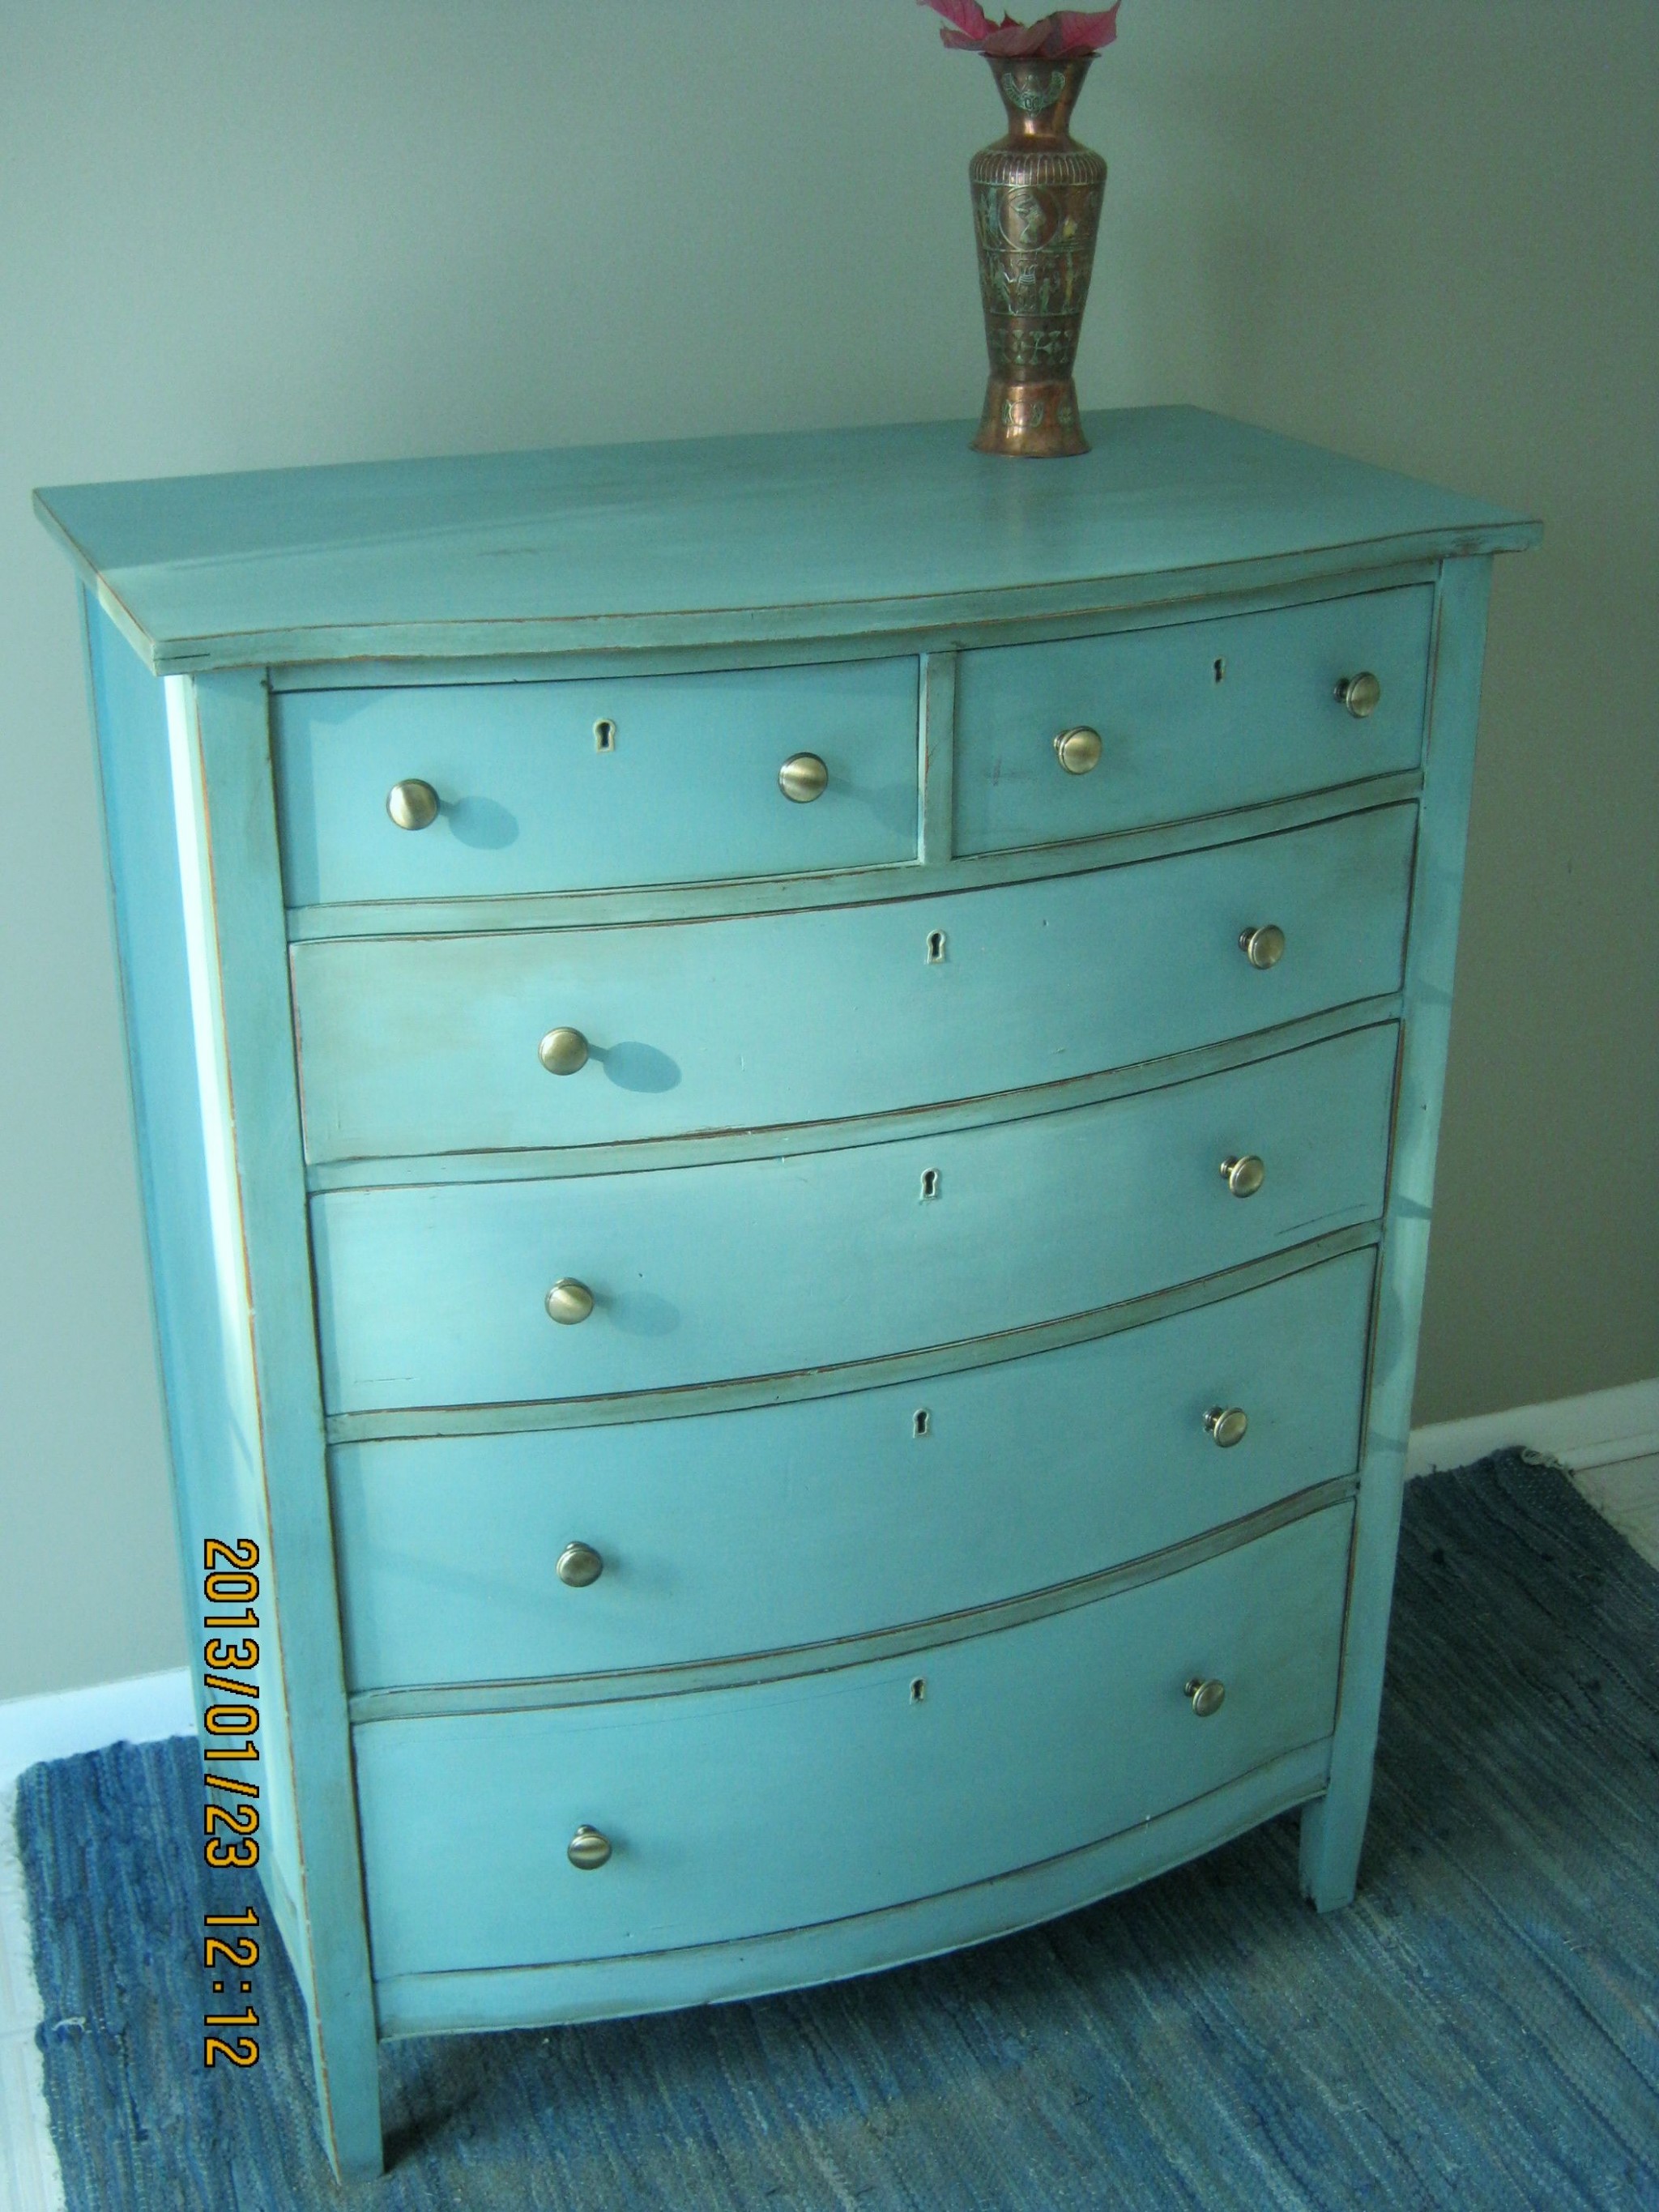 A Chalk Painted Mahogany Dresser In Annie Sloan Provence | Redo ..